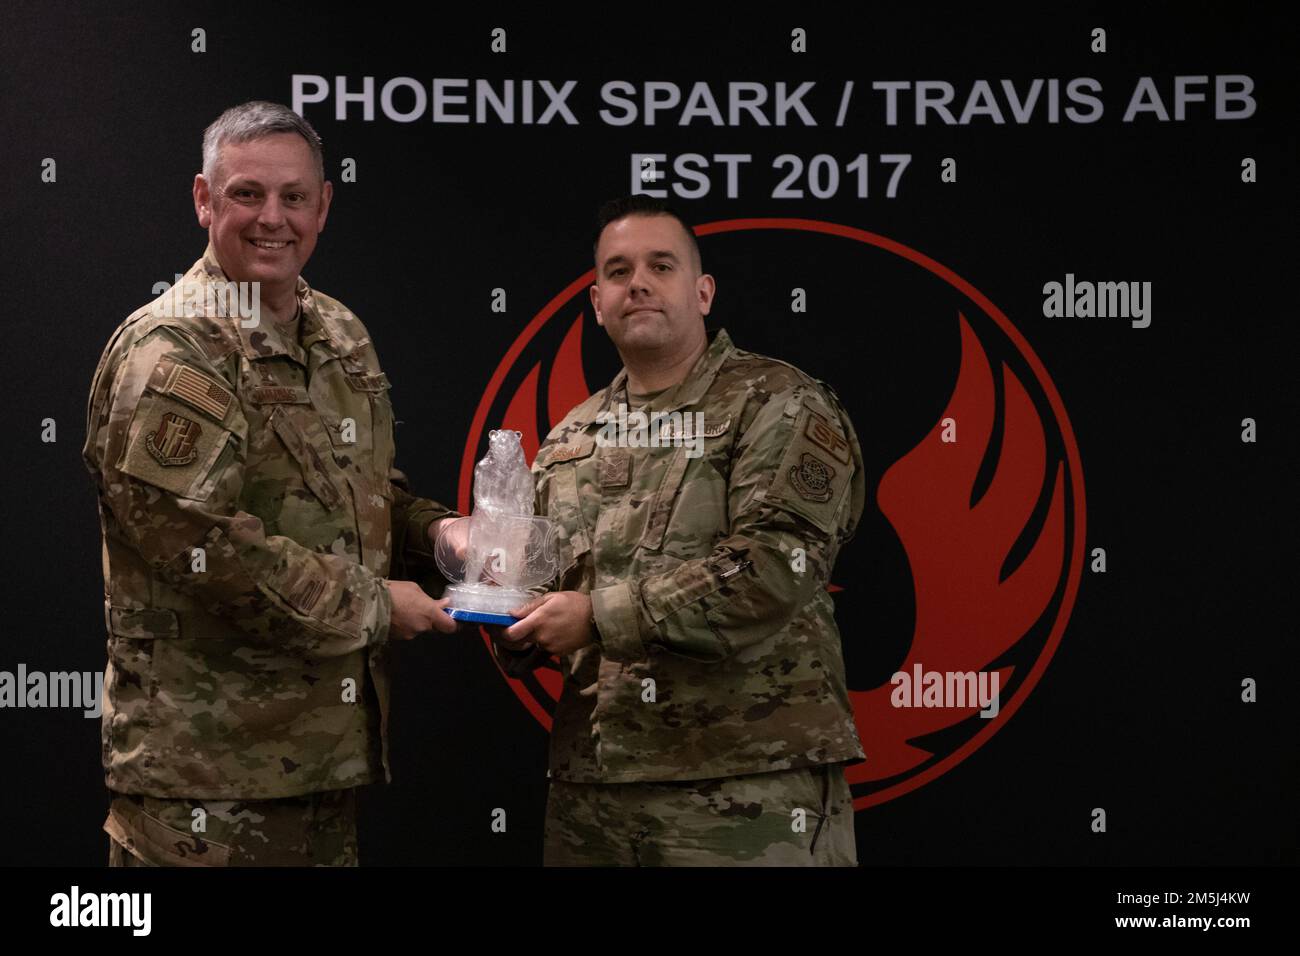 U.S. Air Force Col. Corey Simmons, 60th Air Mobility Wing commander, presents the 2022 Golden Bear Travis Air Force Base Impact Award to Tech. Sgt. Donald Gresham, 60th Security Forces Squadron noncommissioned officer in charge of the access control section, at Travis AFB, California, March 18, 2022. Phoenix Spark hosted the Travis AFB Spark Tank 2022. It recognized the top six finalists from a field of 55 ideas submitted by Travis Airmen to the inaugural Squadron Innovation Funds Sparks Tank. The ideas varied from a six-figure software system to simple purchases of off-network machines. Stock Photo